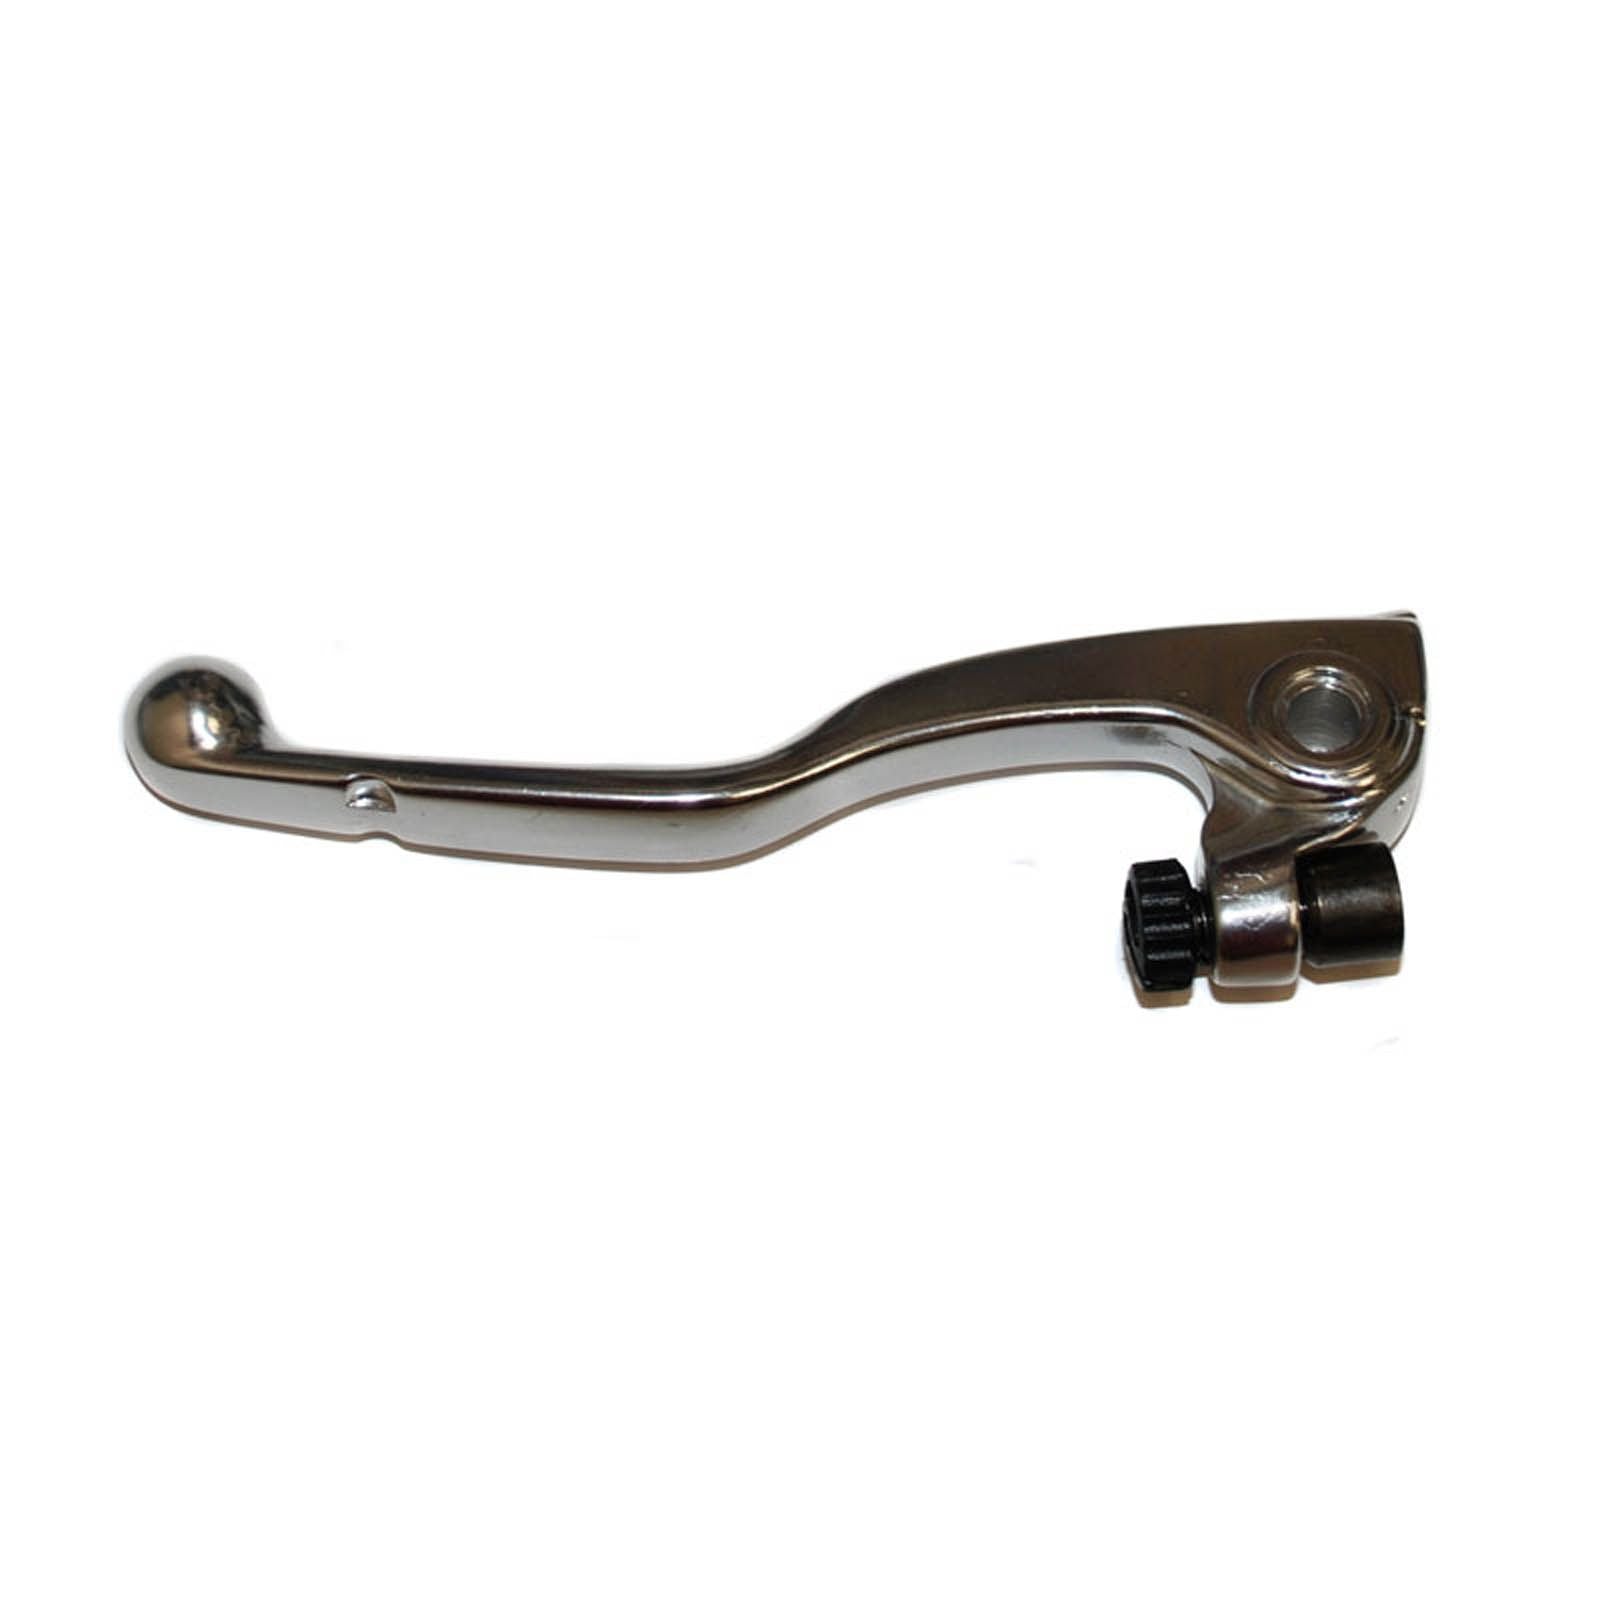 New WHITES Motorcycle Clutch Lever #L8C548